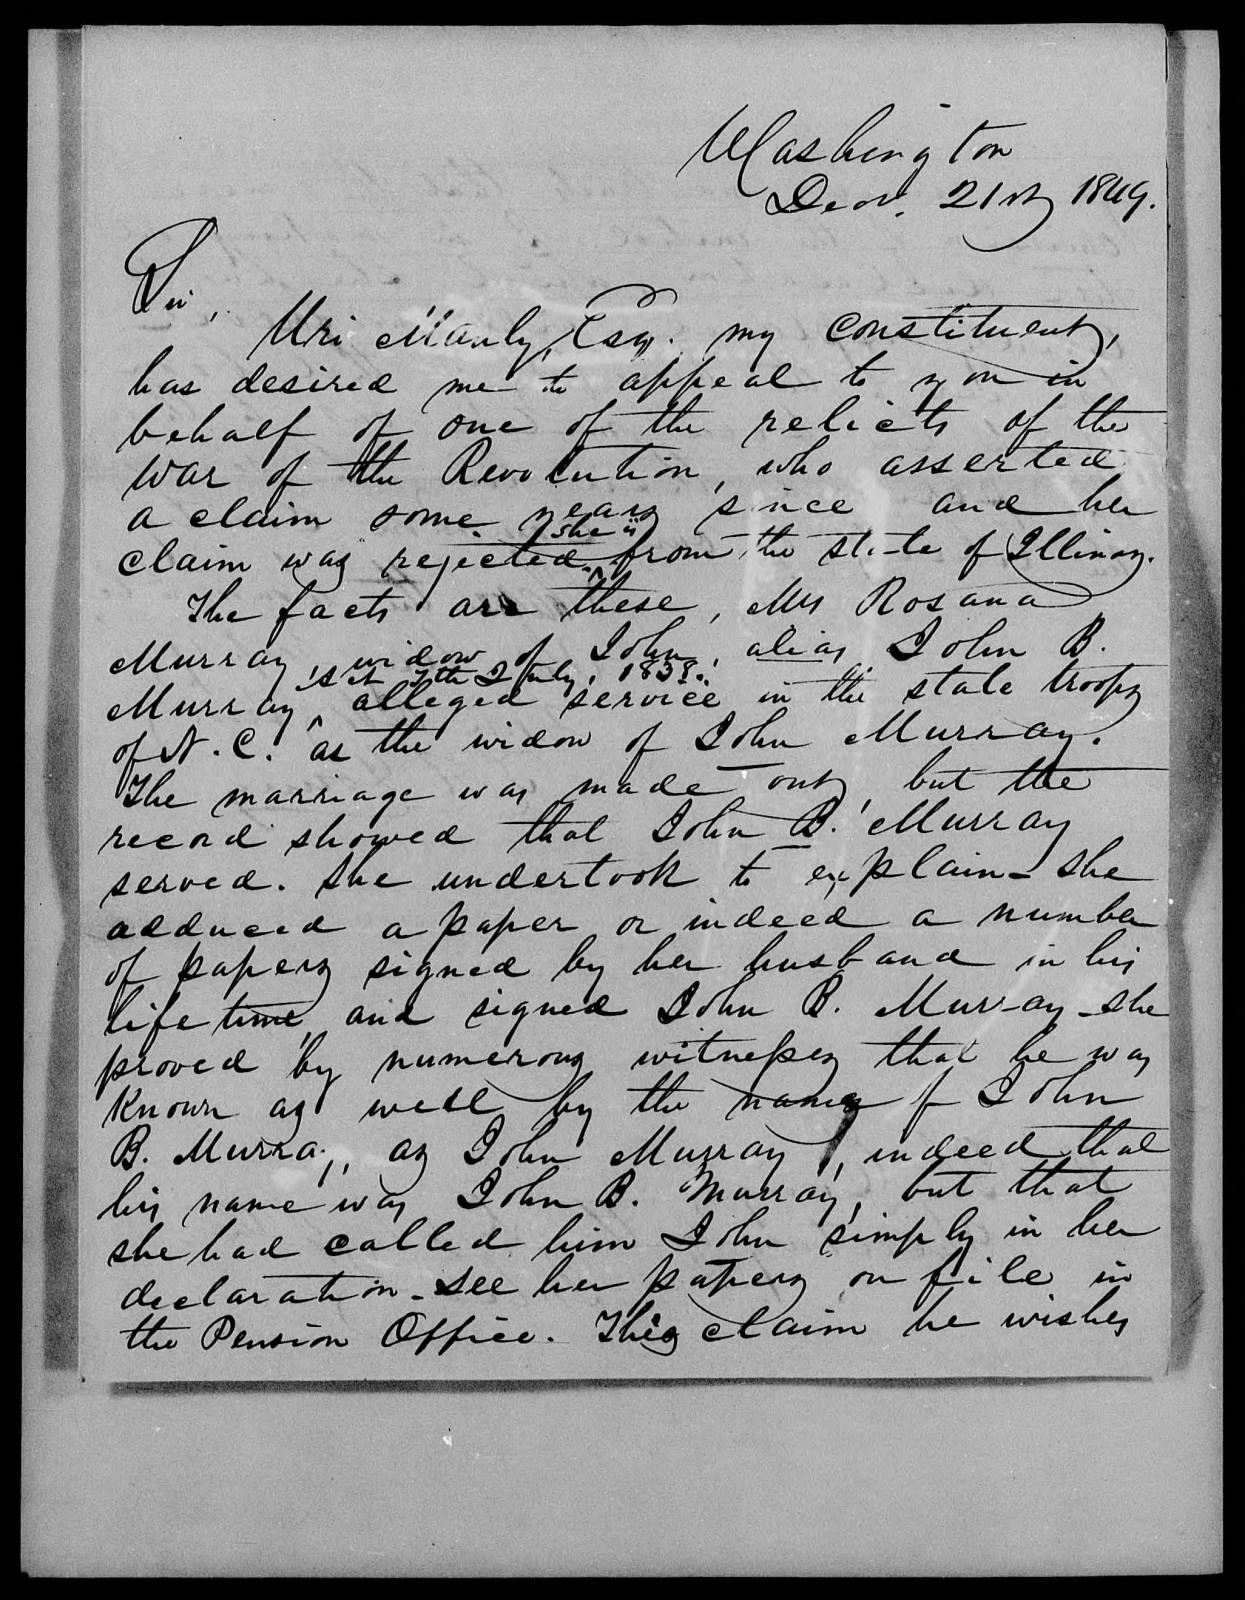 Letter from T. R. Young to Thomas Ewing, 21 December 1849, page 1